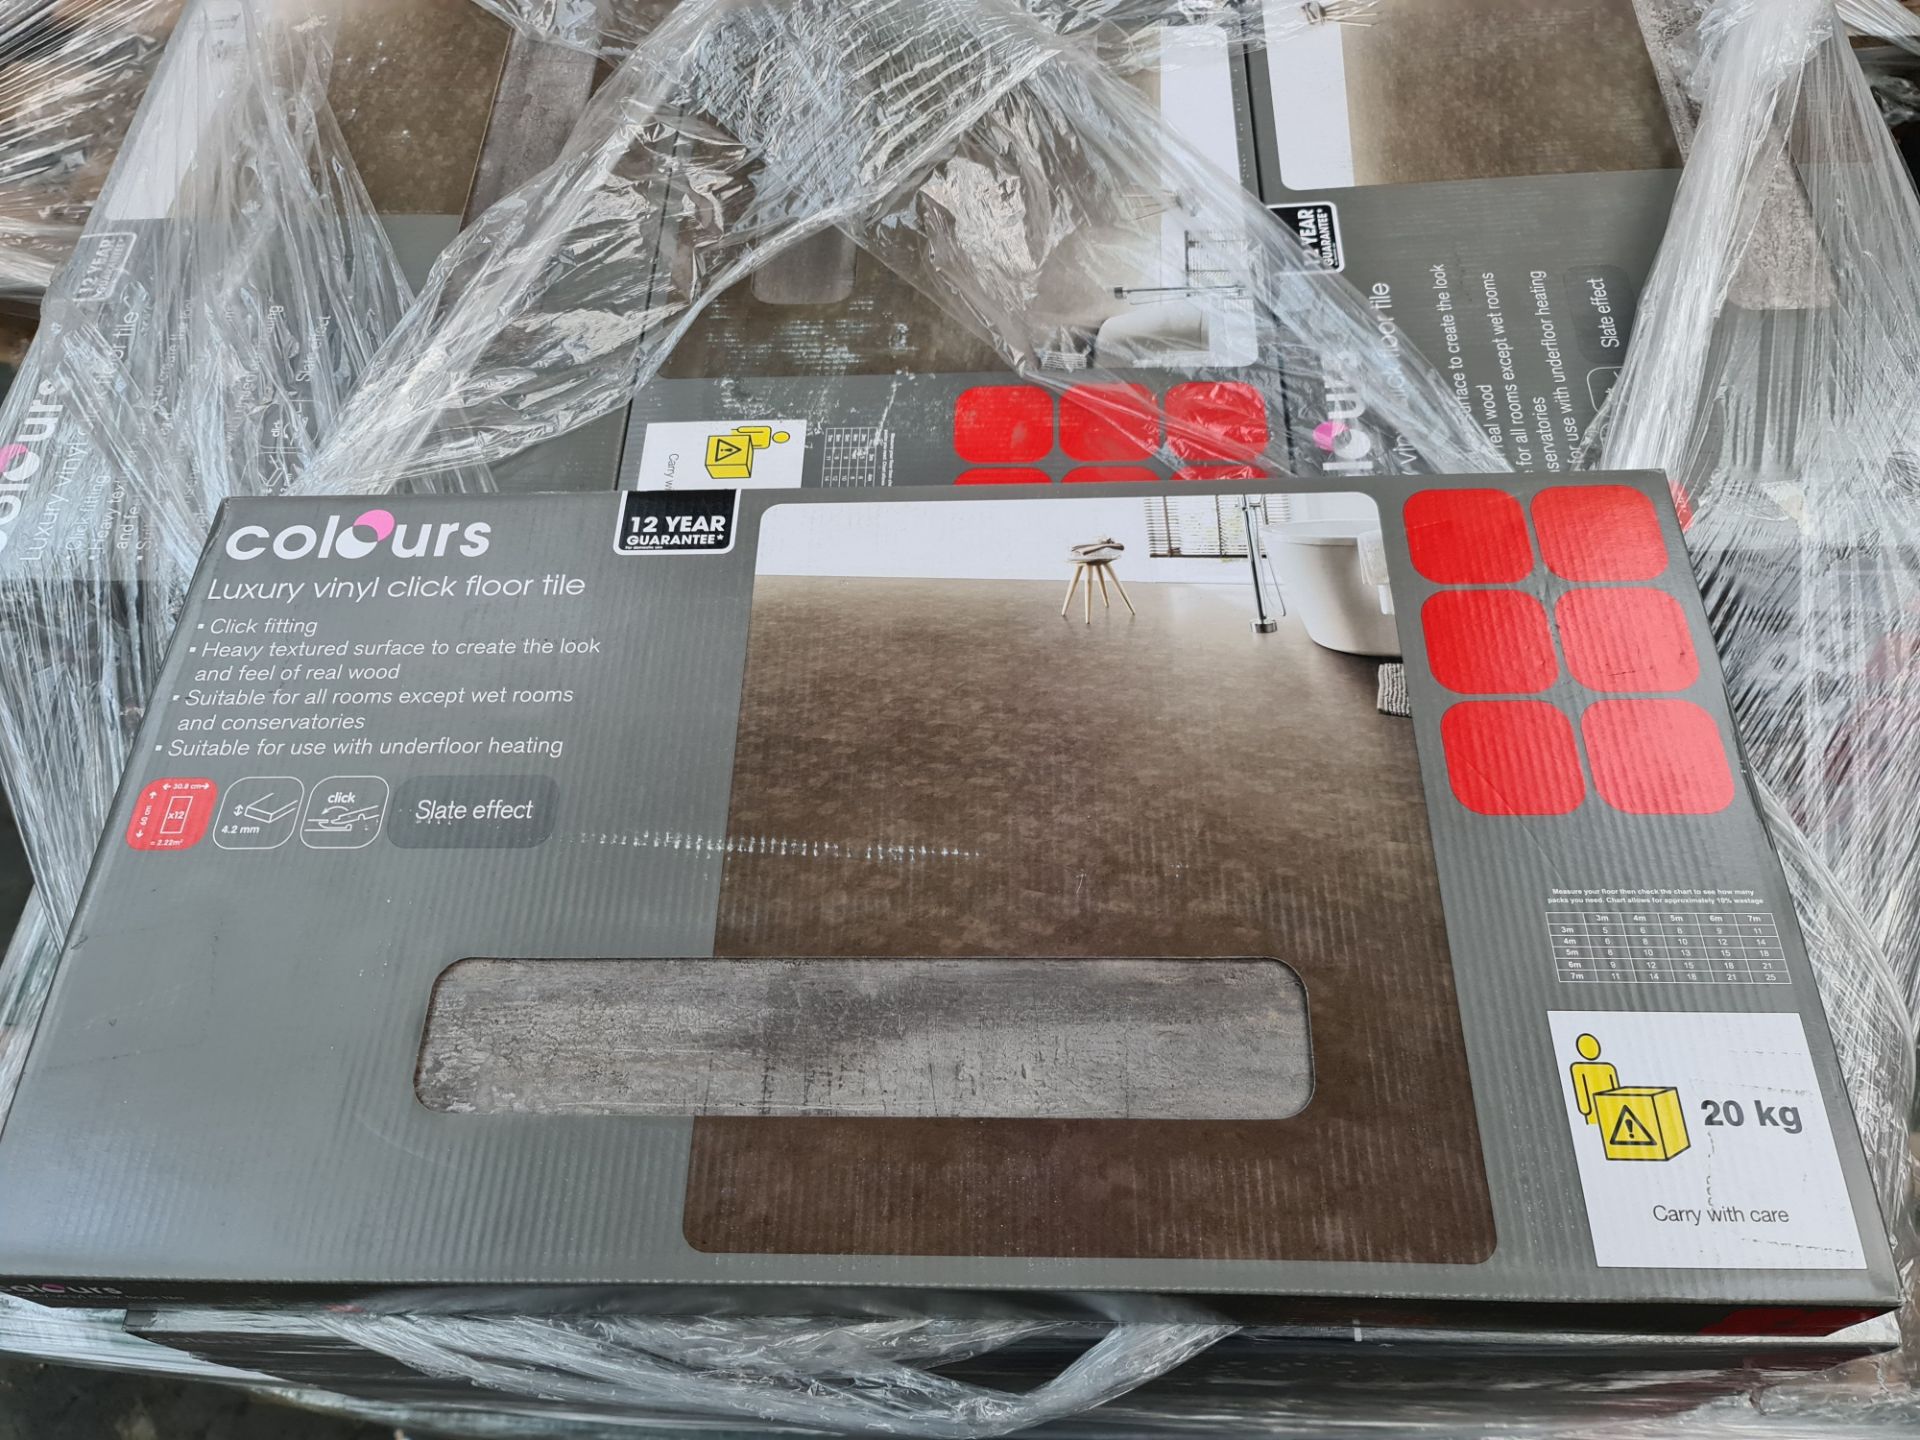 (WG11) Pallet To Contain 21 x New Sealed Packs Of Luxury Vinyl Click Floor Tiles. Slate Effect....